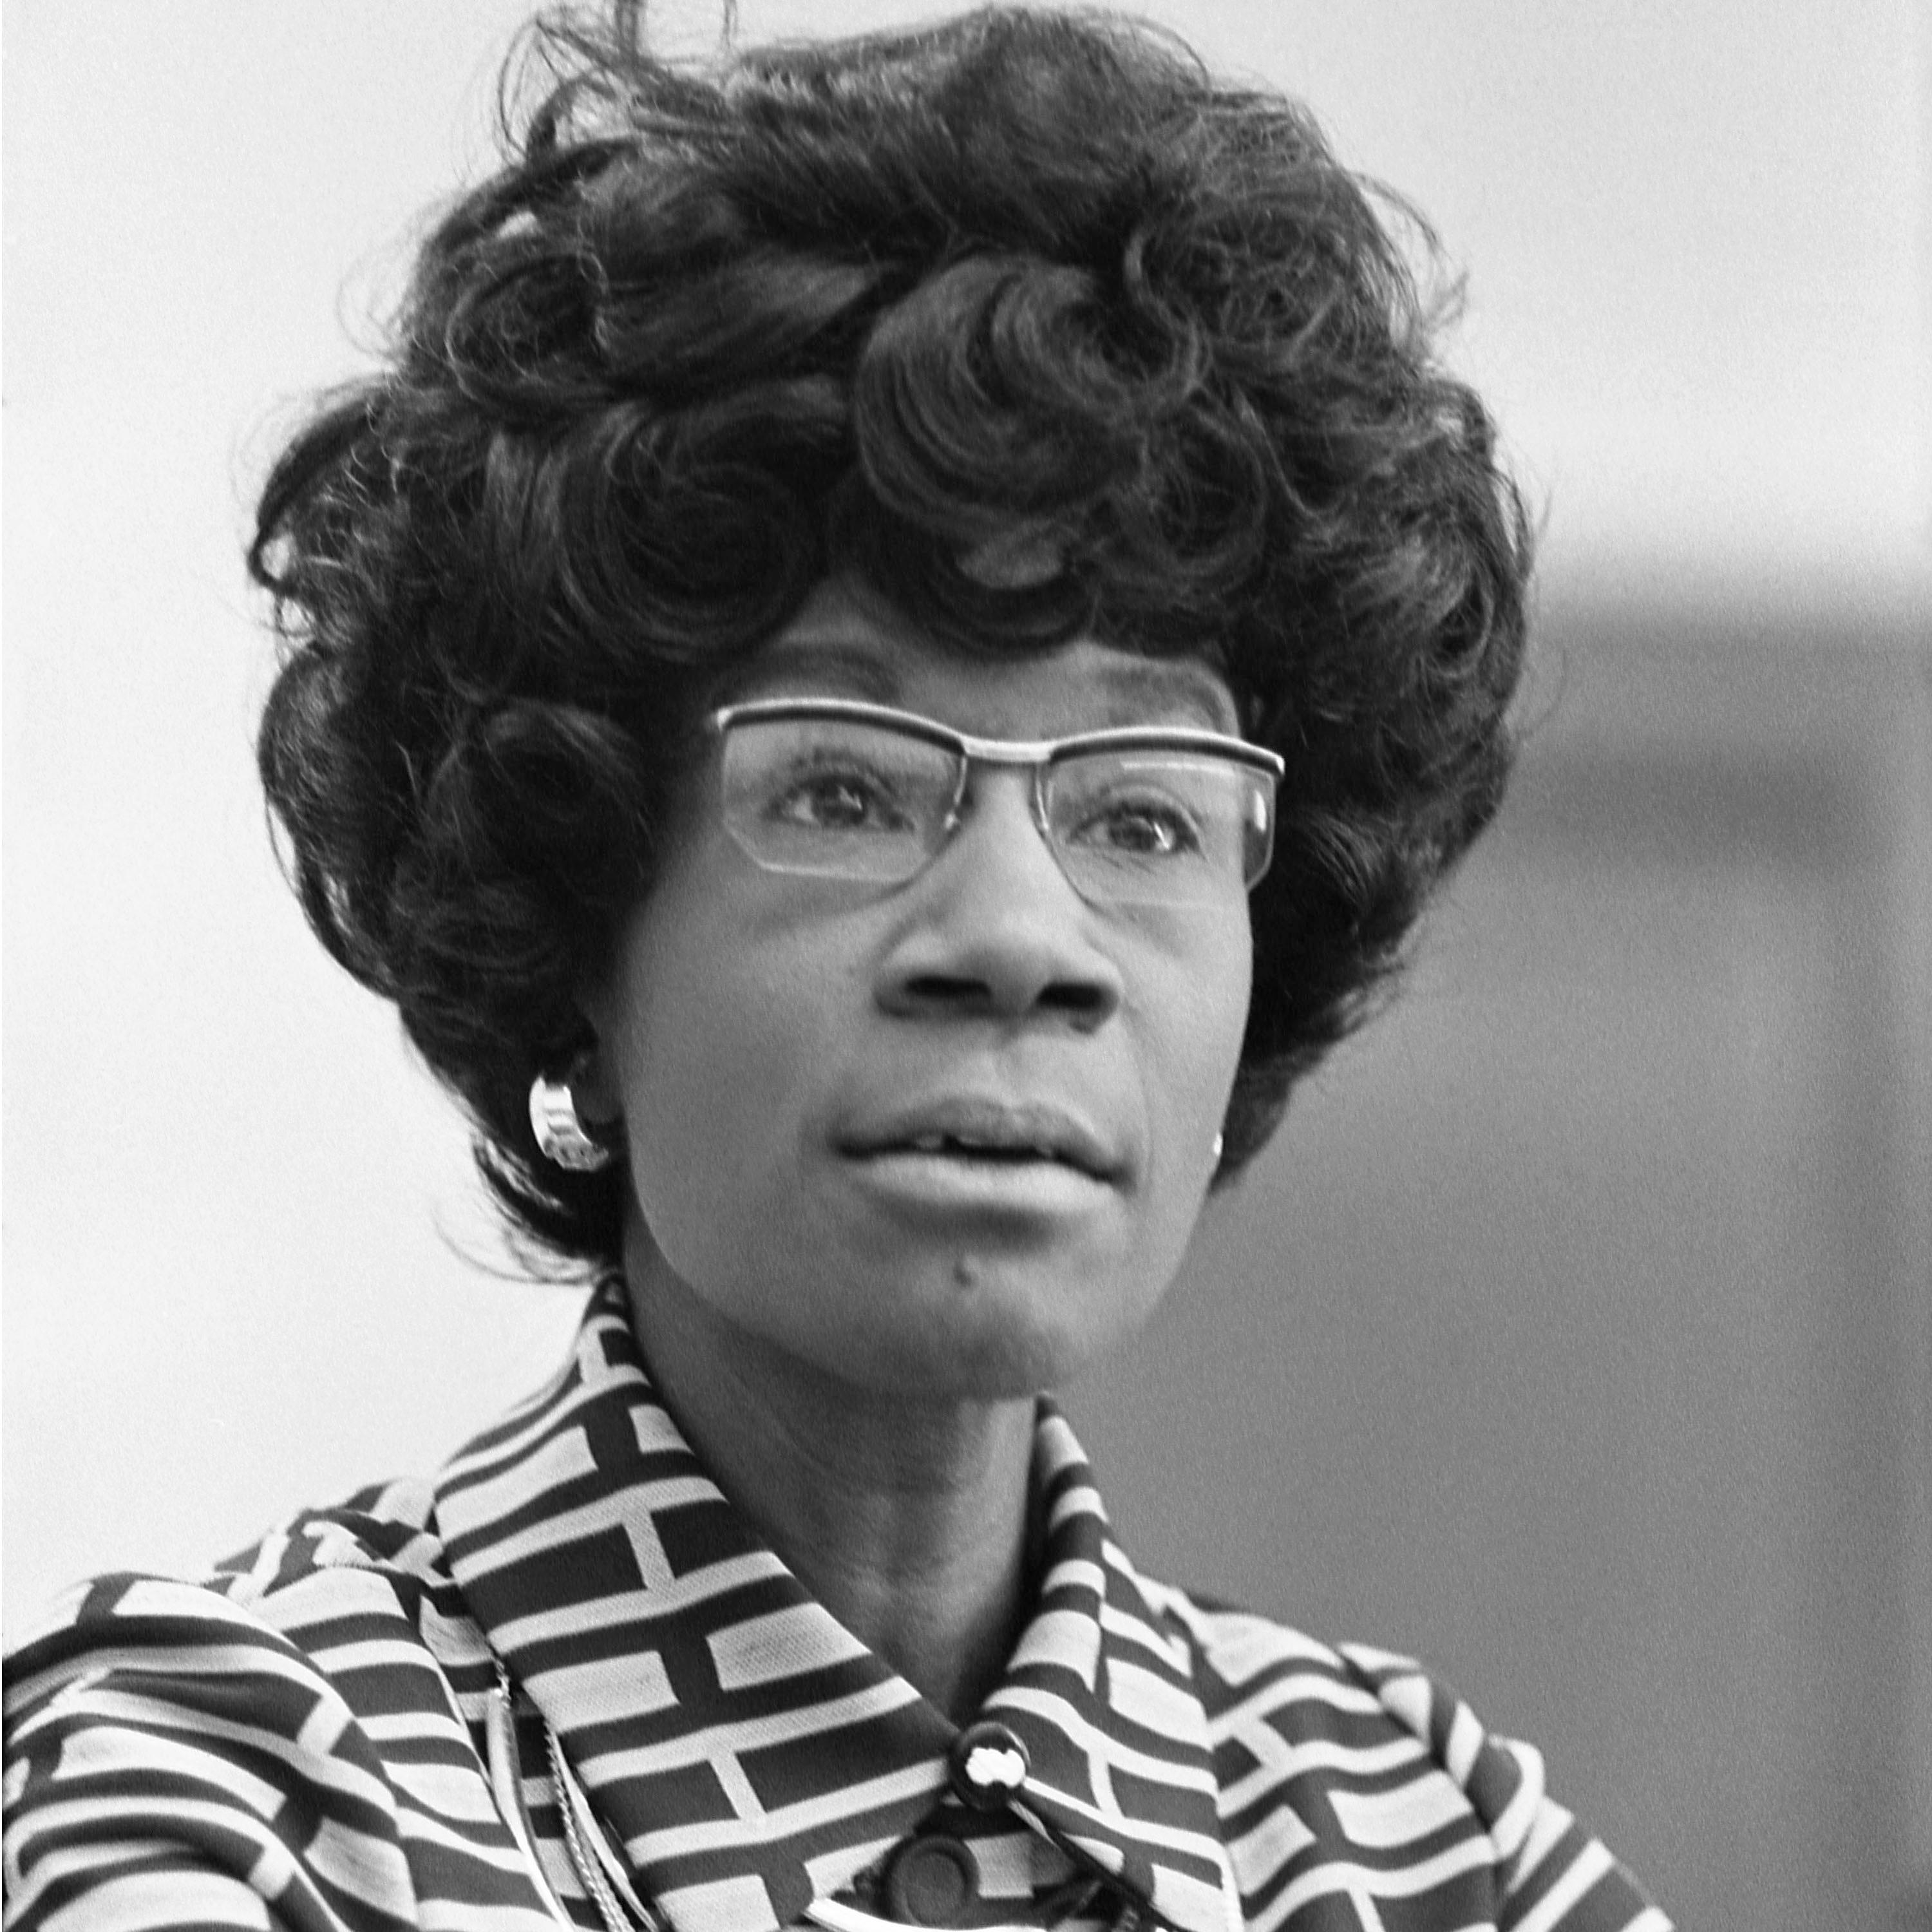 Thumbnail for "Shirley Chisholm: Unbought and Unbossed".